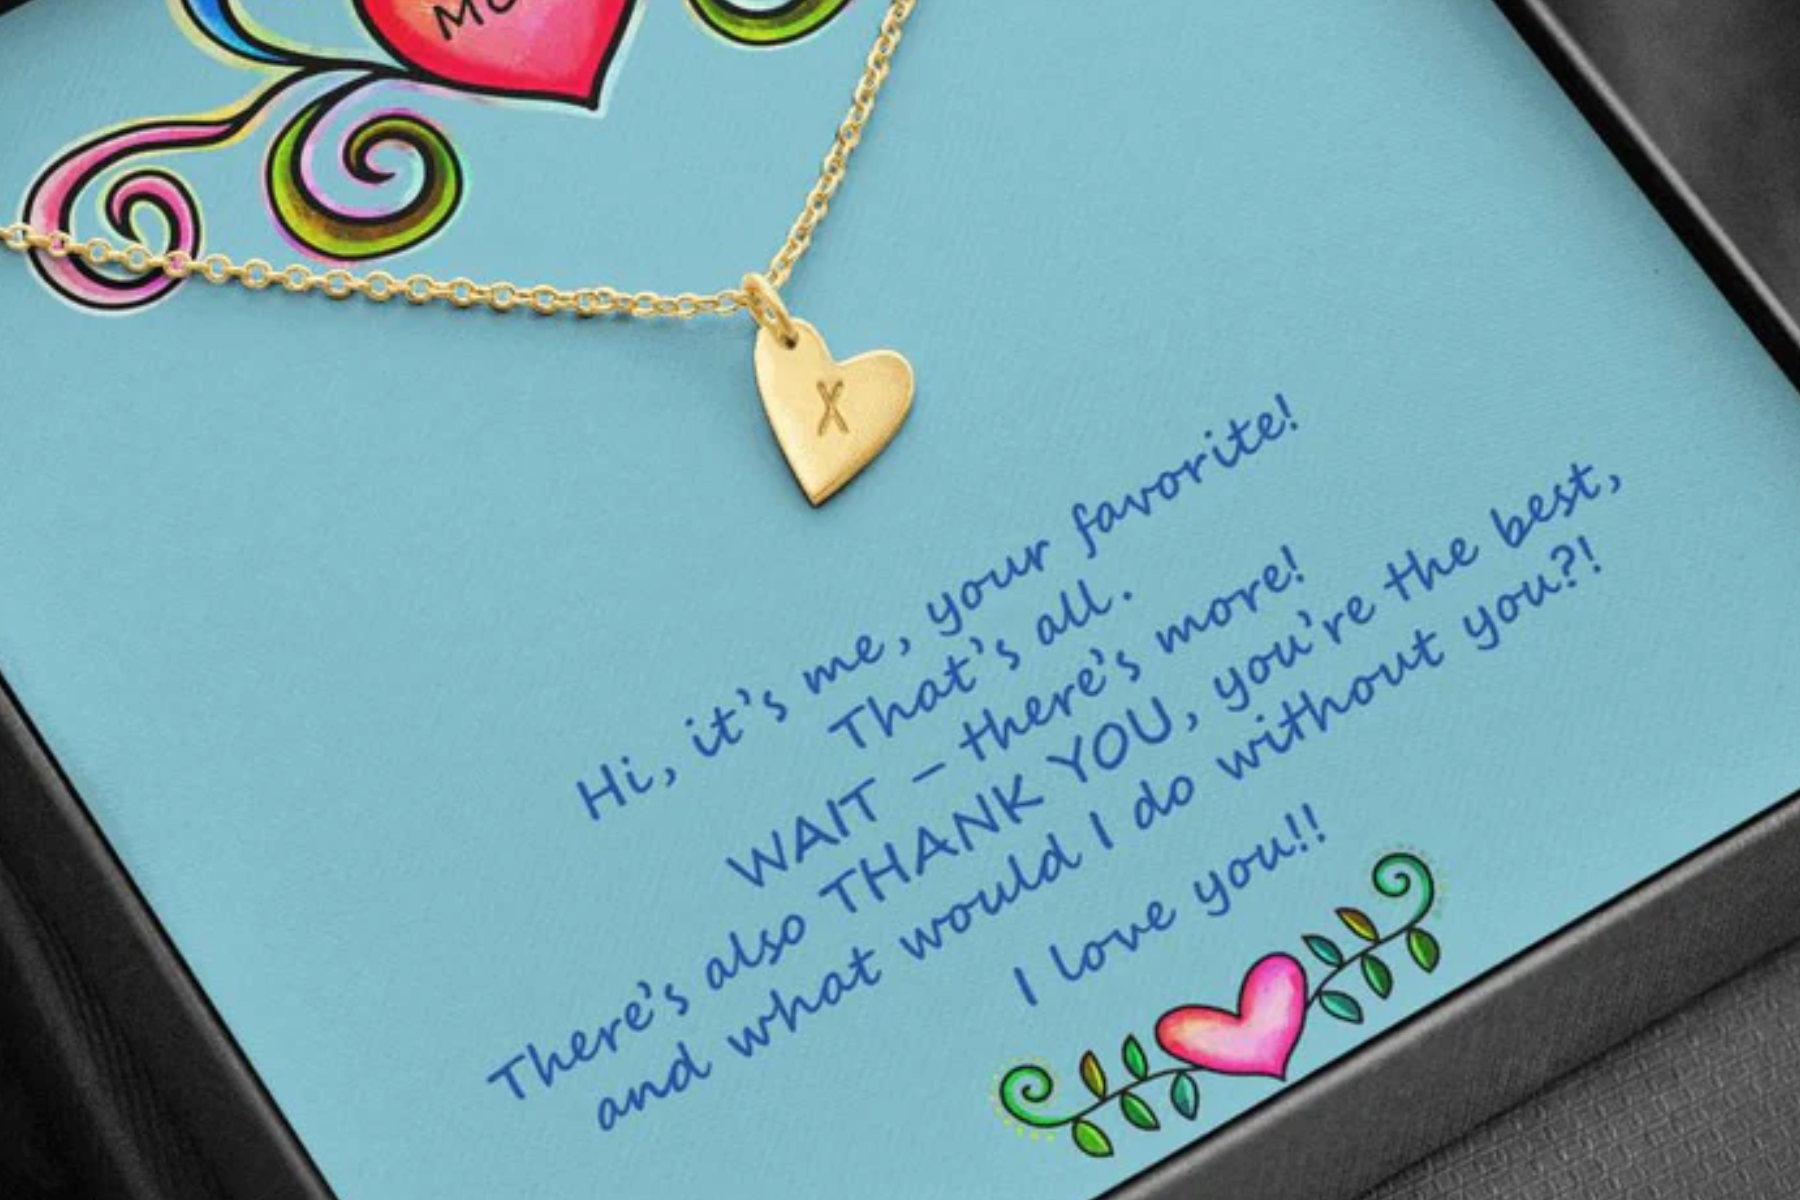 A gold charm necklace atop a mother's letter